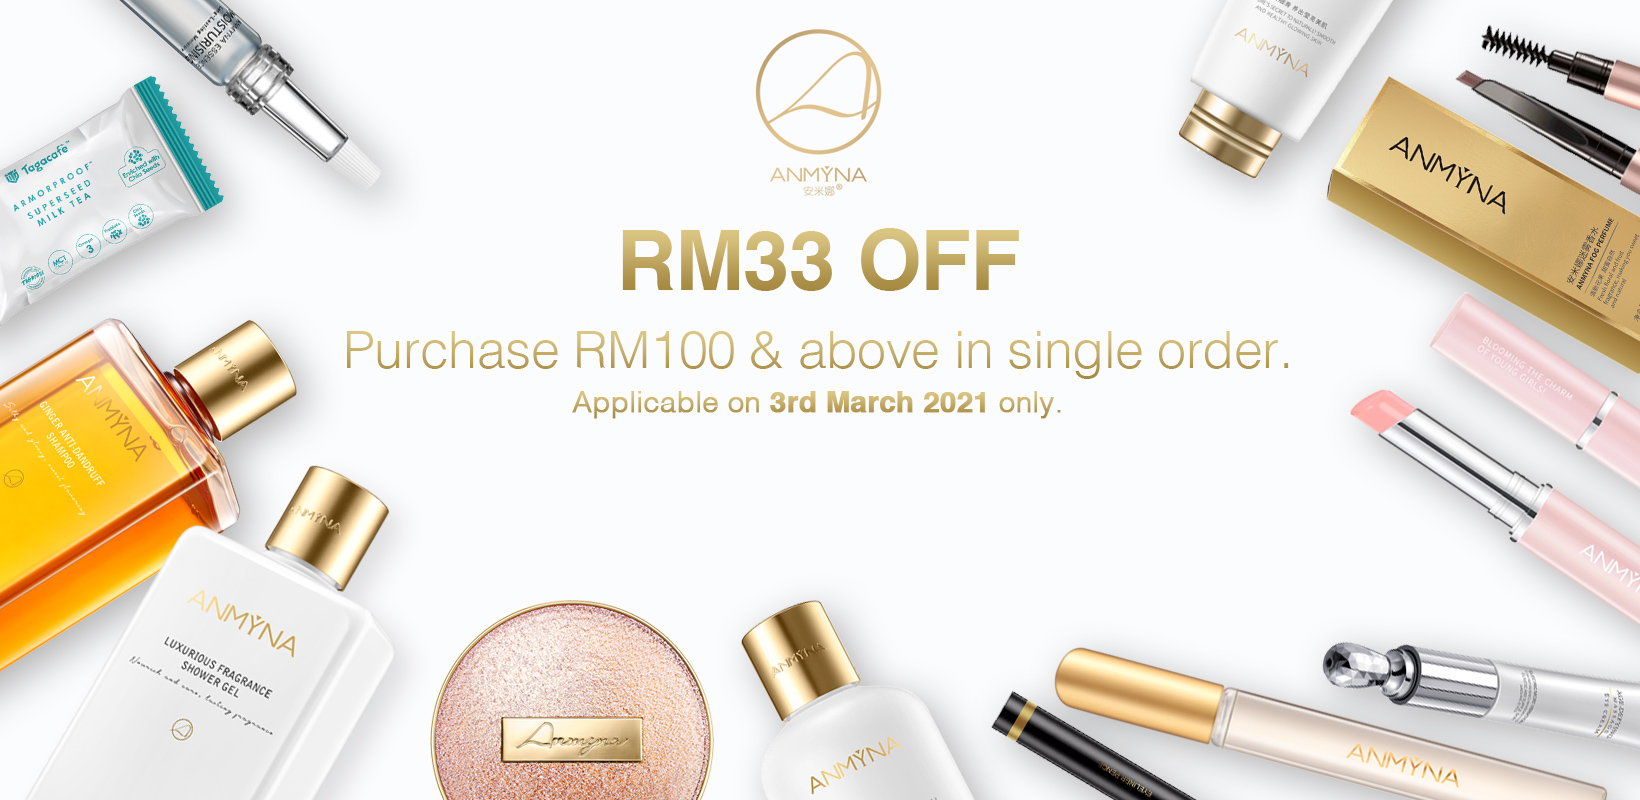 Anmyna Promotion! 03.03 RM33 OFF!